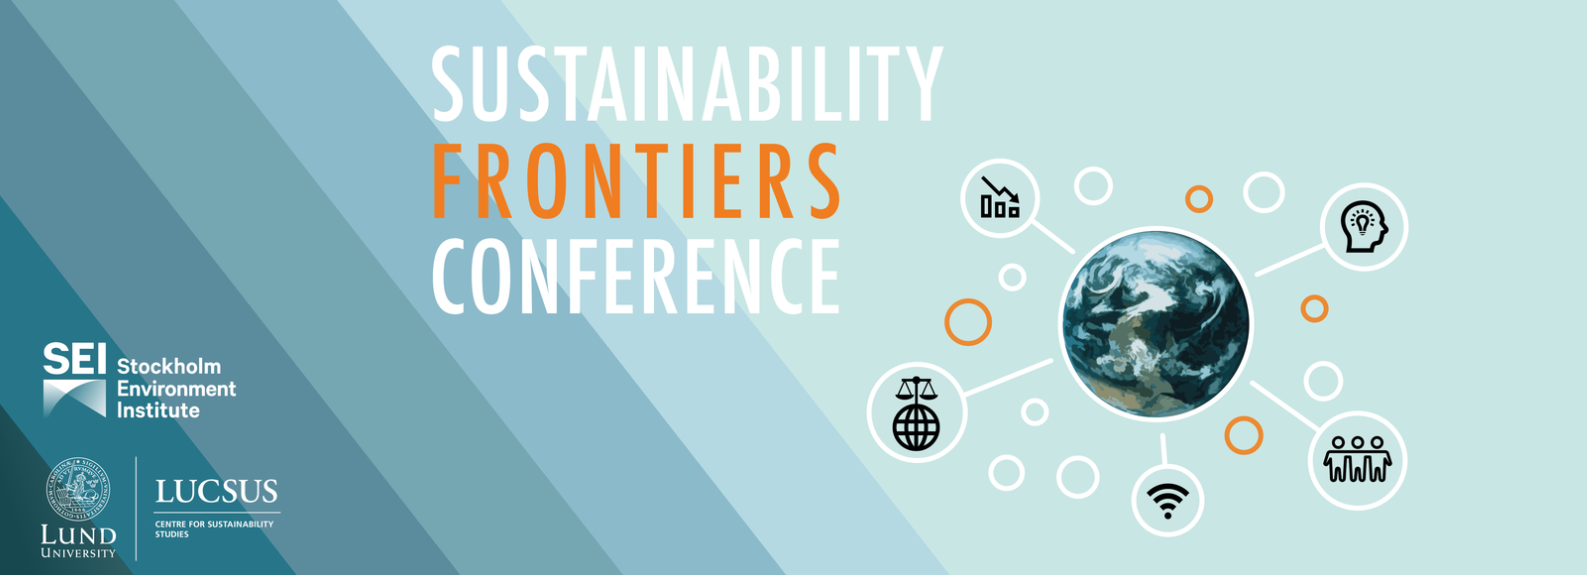 Sustainability Frontiers Conference logo. 